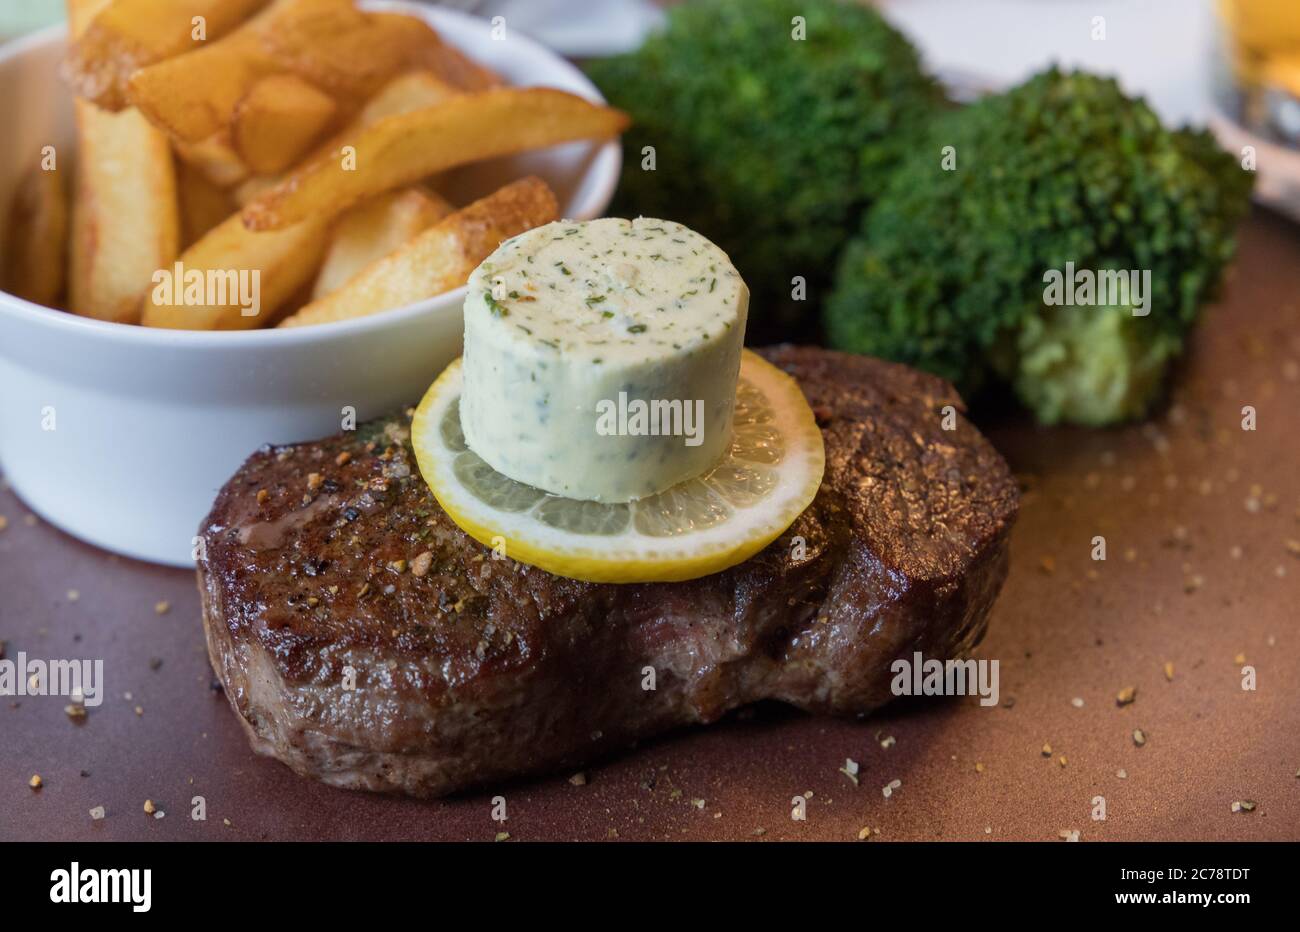 closeup of a roasted steak with herb butter, broccoli and fries served on a plate with salt and pepper Stock Photo